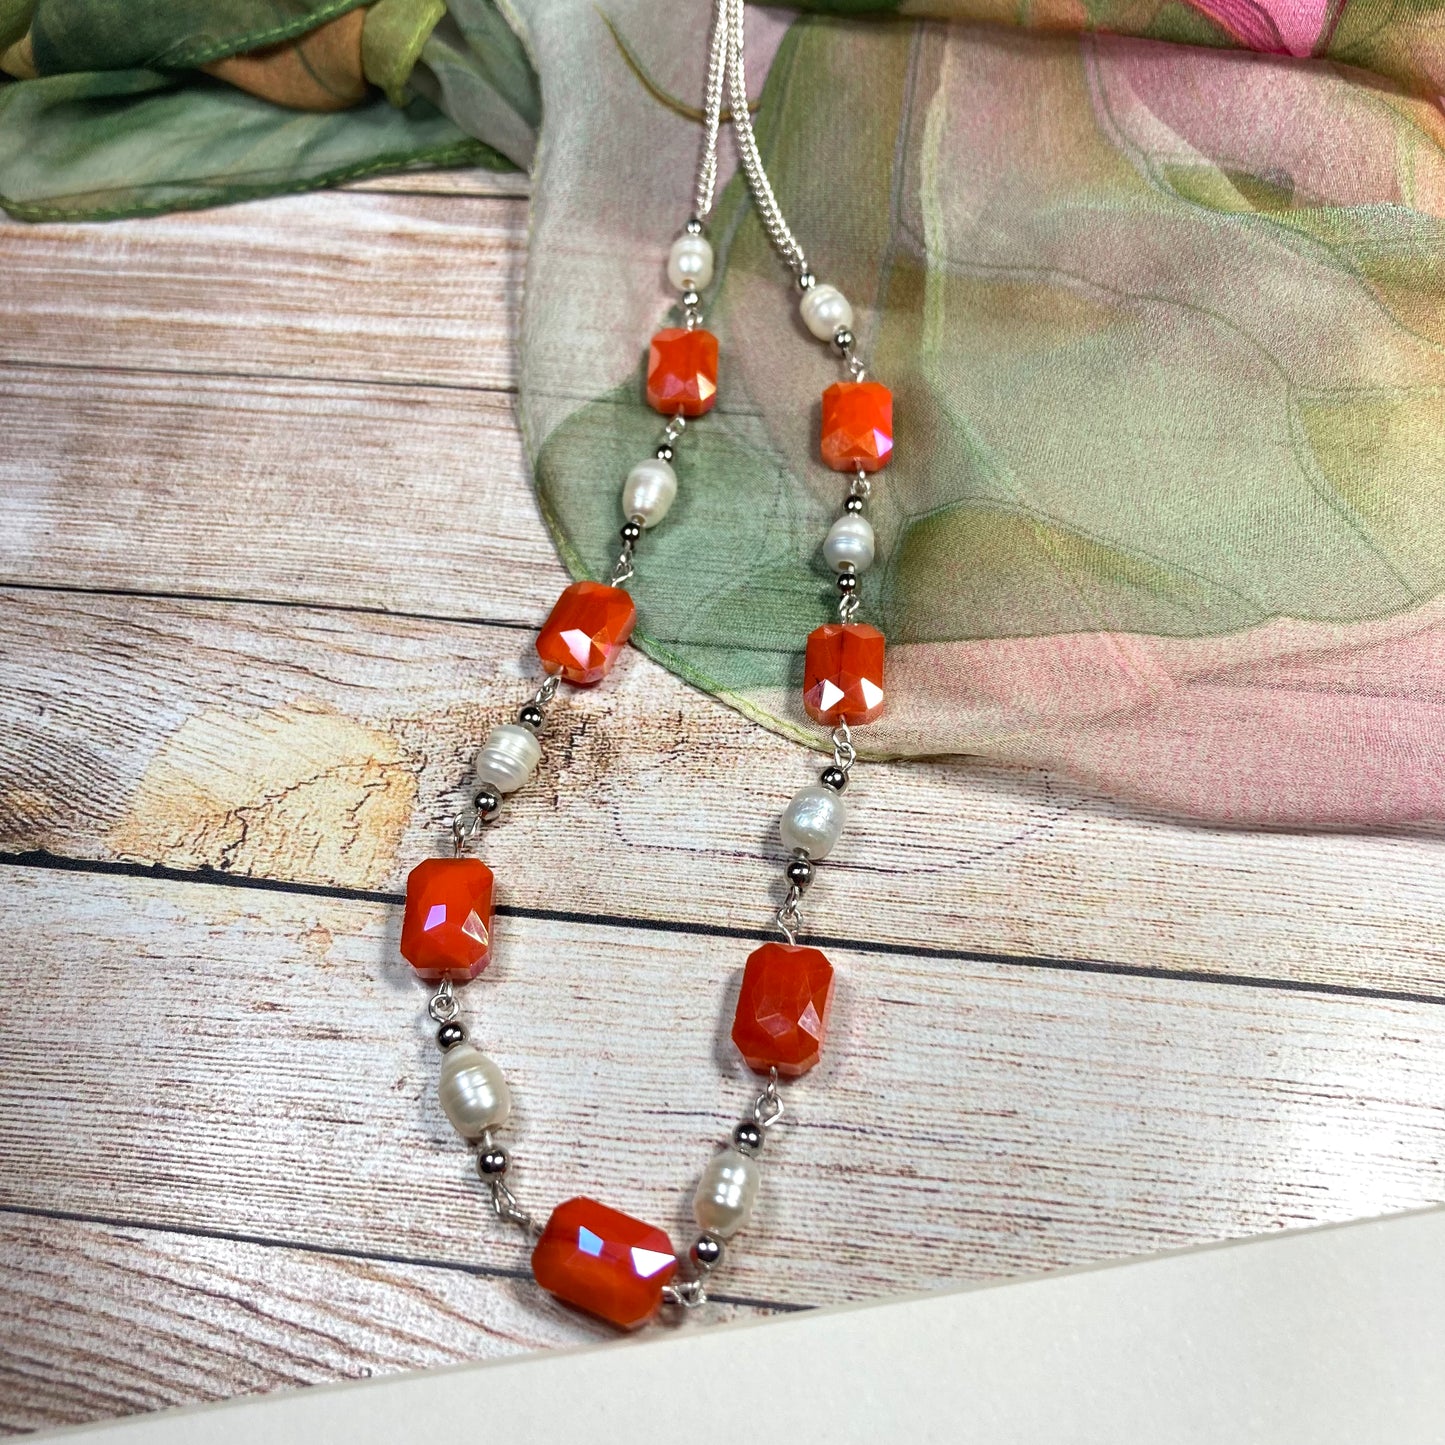 N24-C5 - Orange & Fresh Water Pearls Necklace w/ Silver Accents